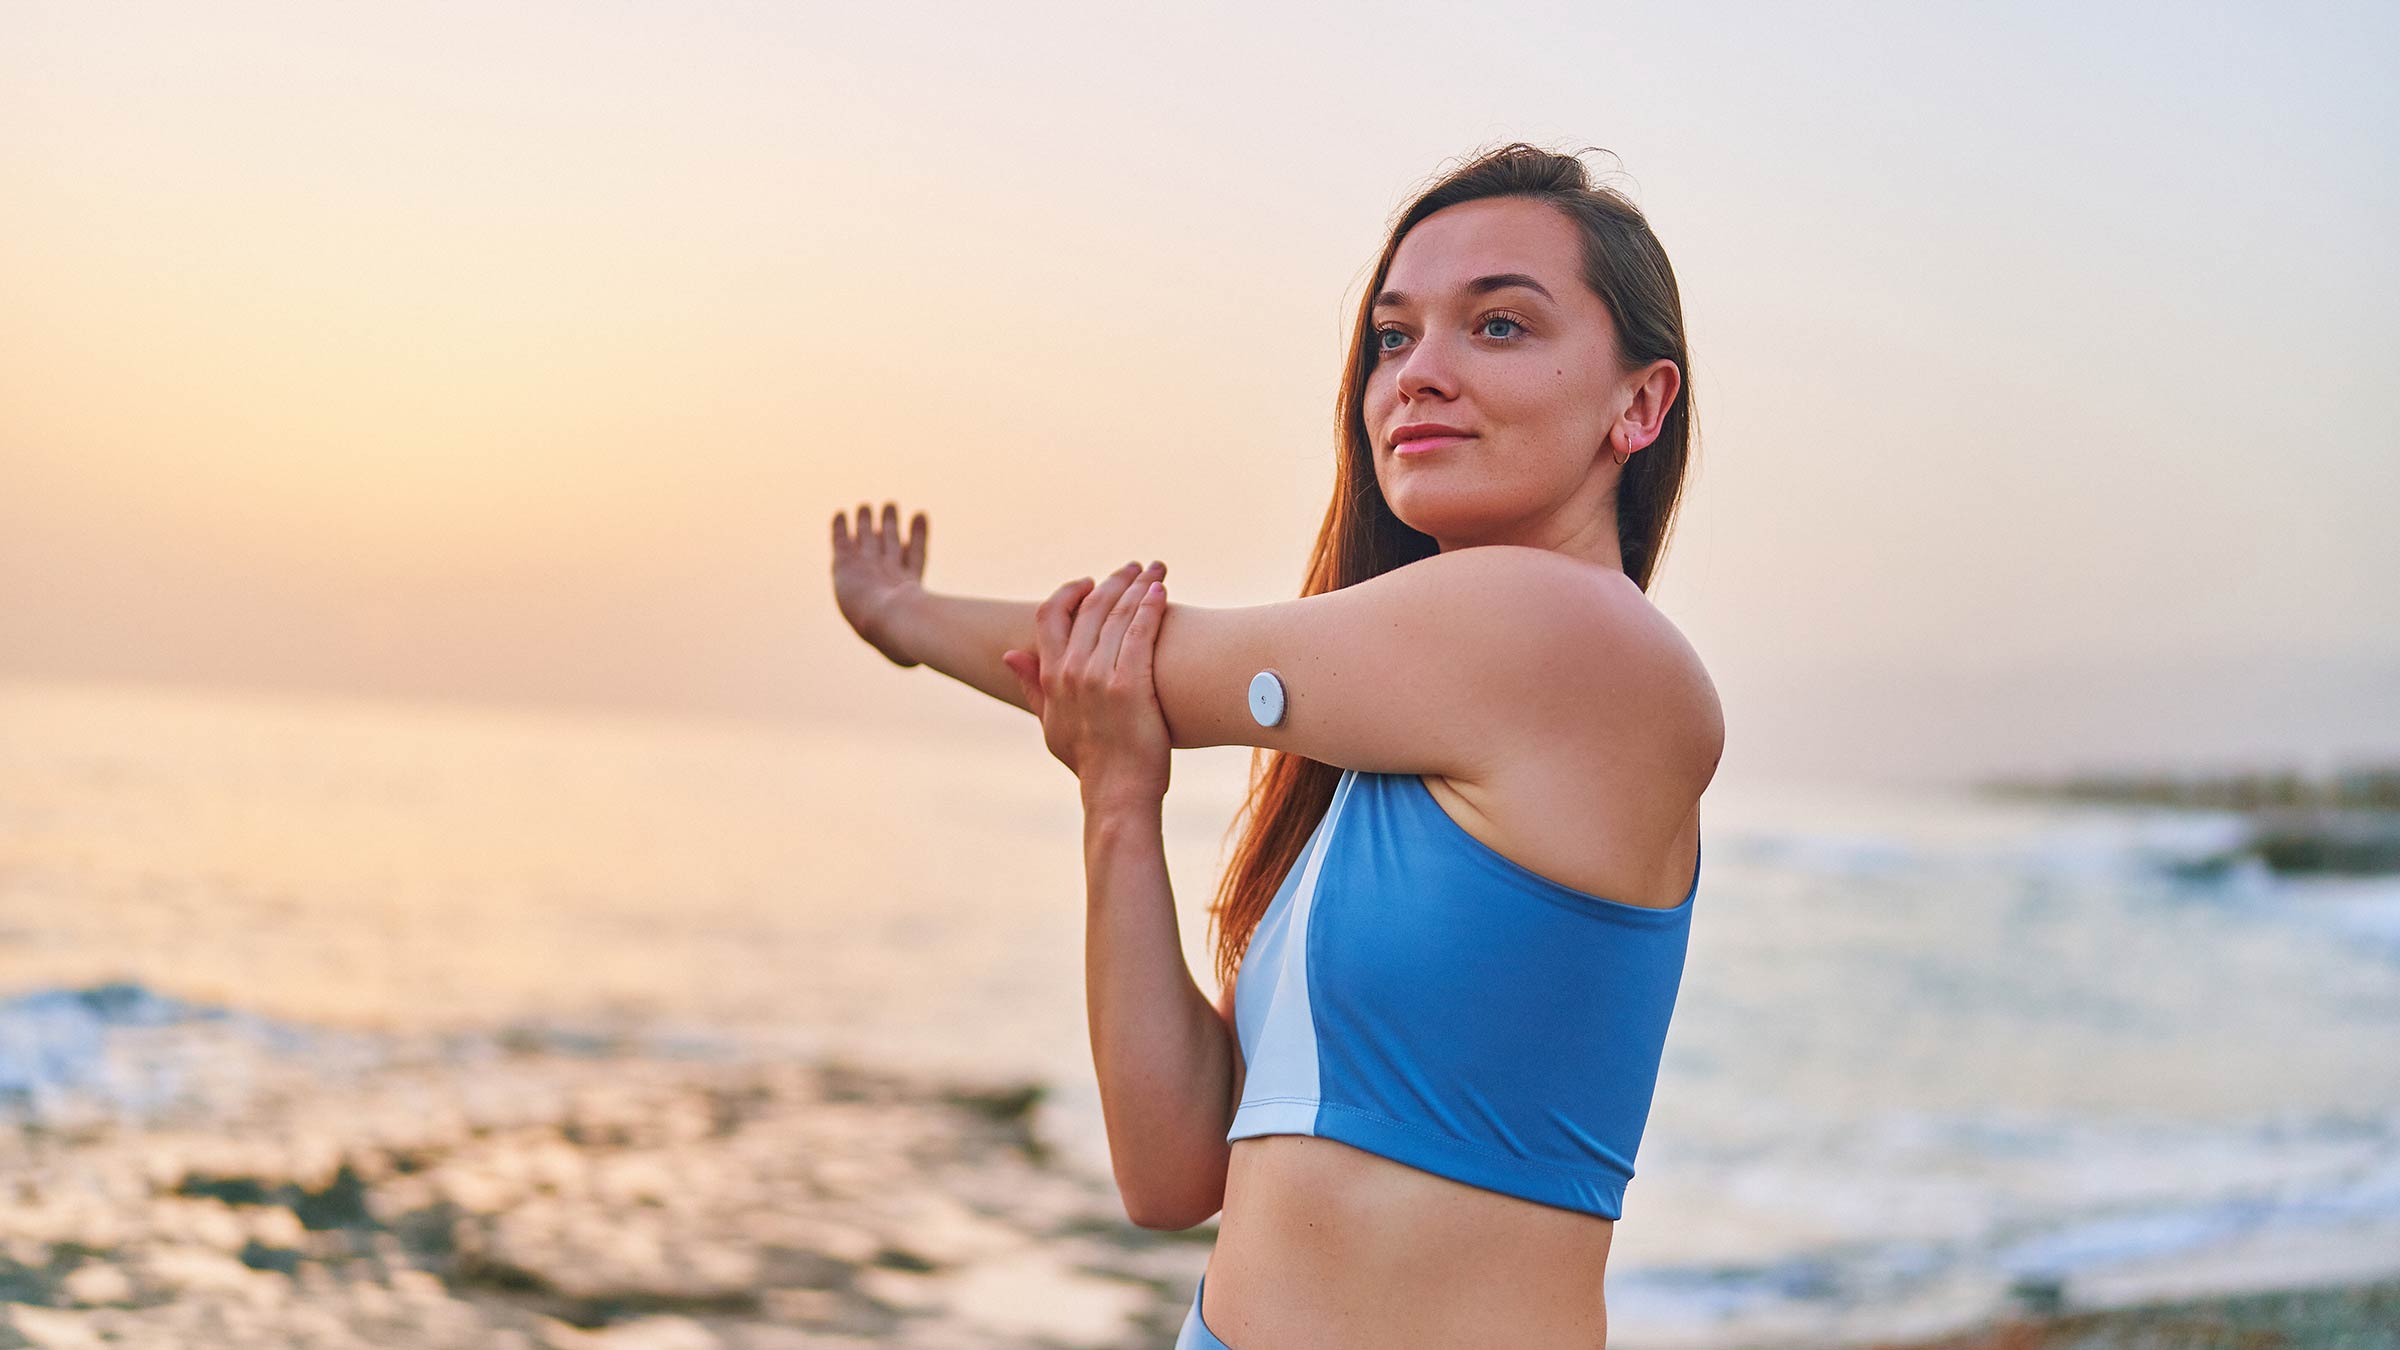 A slim woman with type 1 diabetes stretching by the ocean